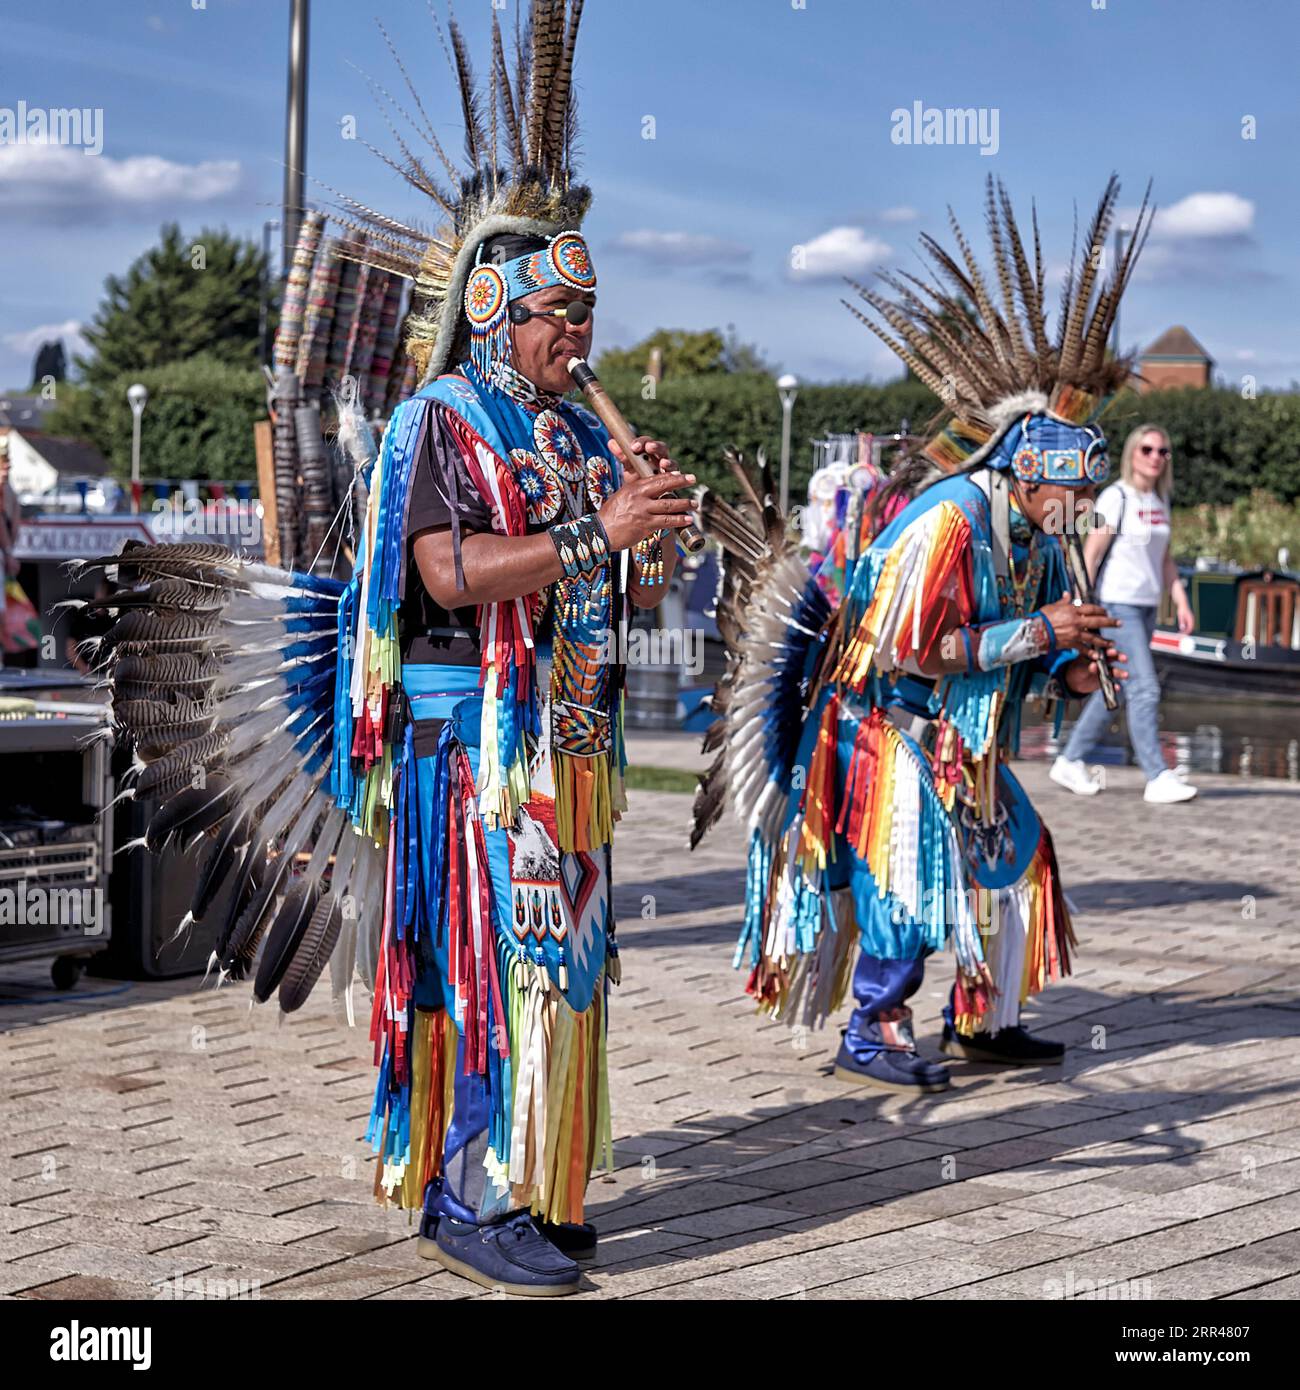 Traditional costume of the people of the Quichua Tribe of Ecuador during a dance display at Stratford upon Avon England UK. Inca Empire descendants Stock Photo